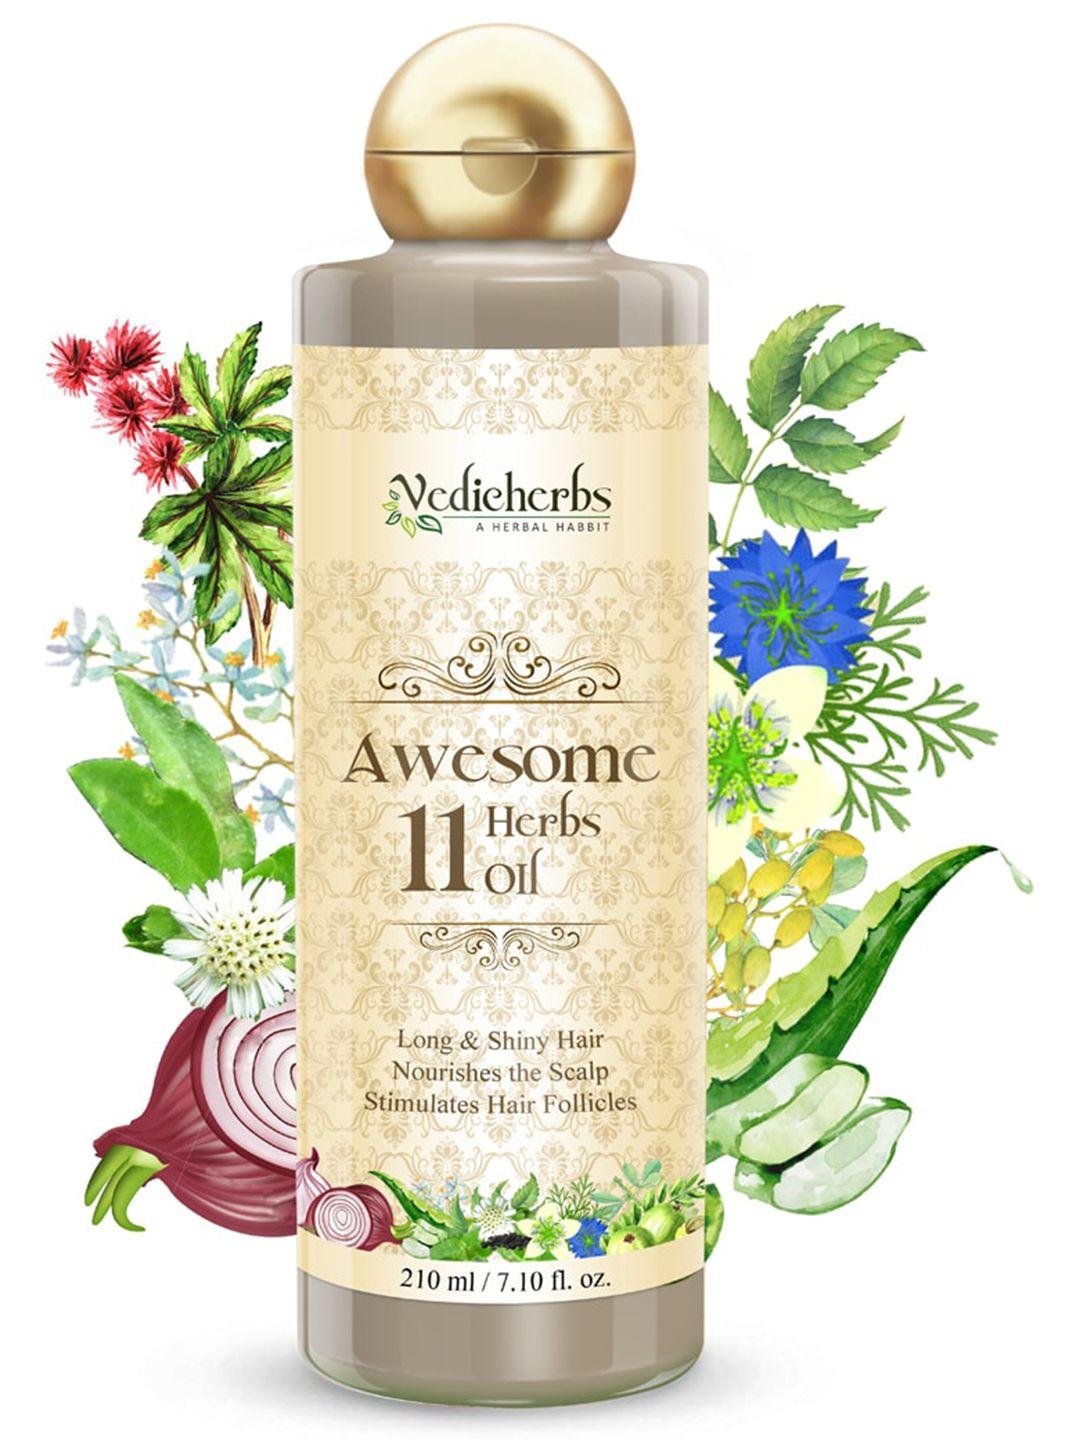 vedicherbs awesome 11 herbs oil for long & shiny hair & nourishes scalp - 210 ml